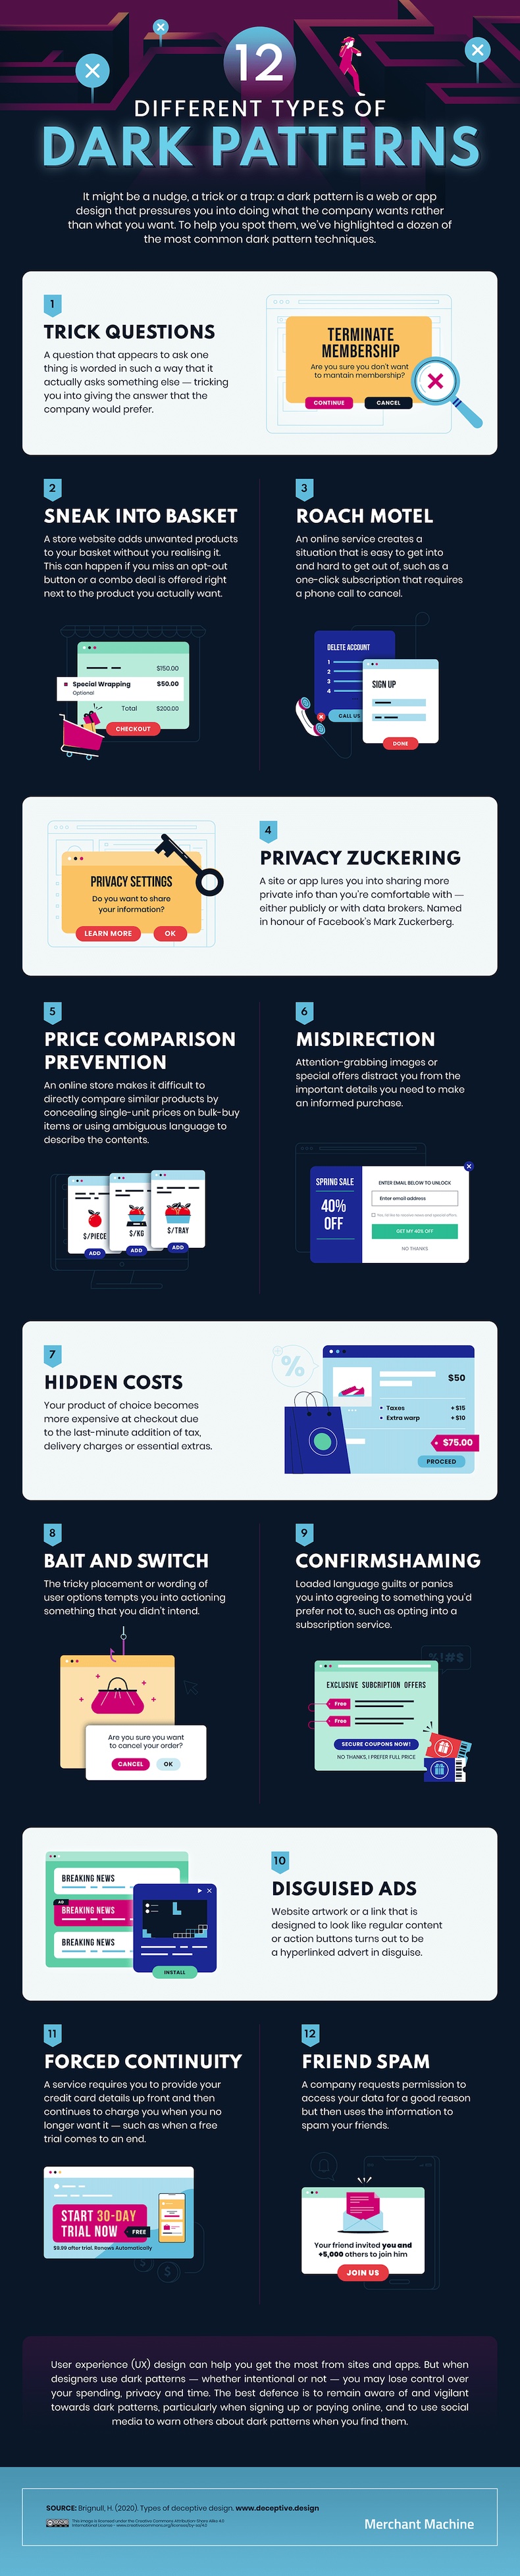 12 types of dark patterns websites use infographic